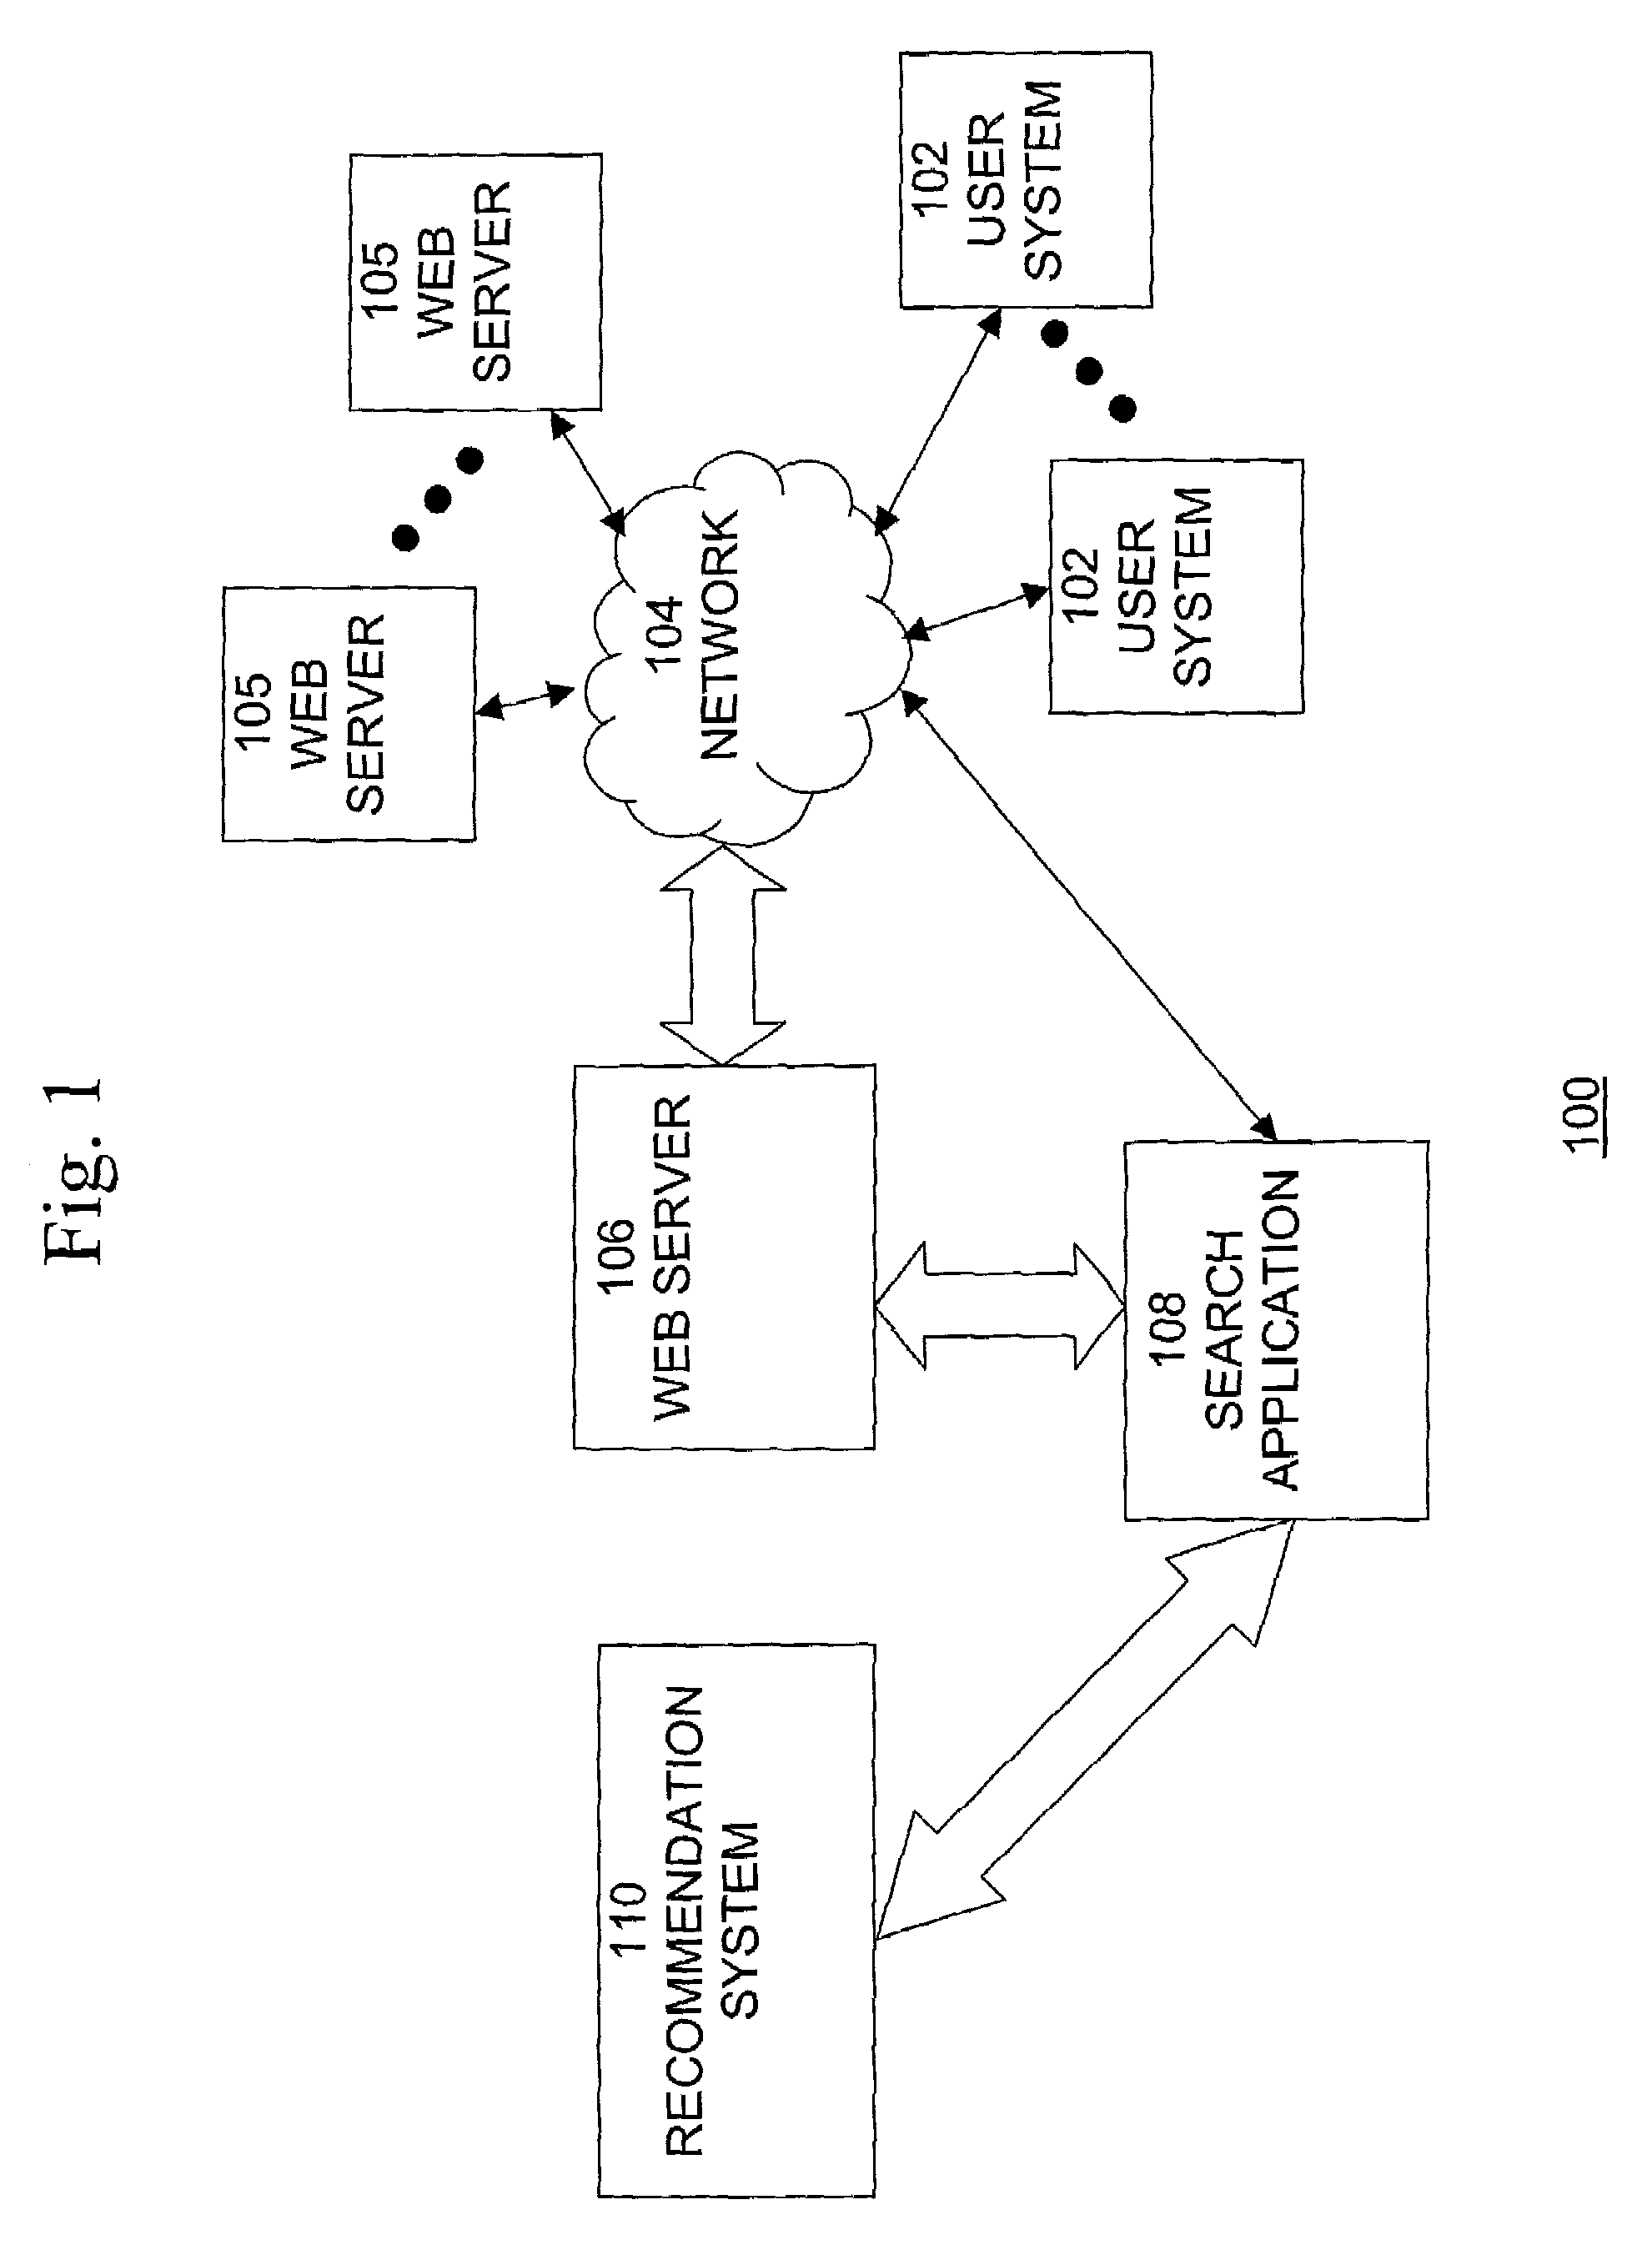 System and method for search and recommendation based on usage mining